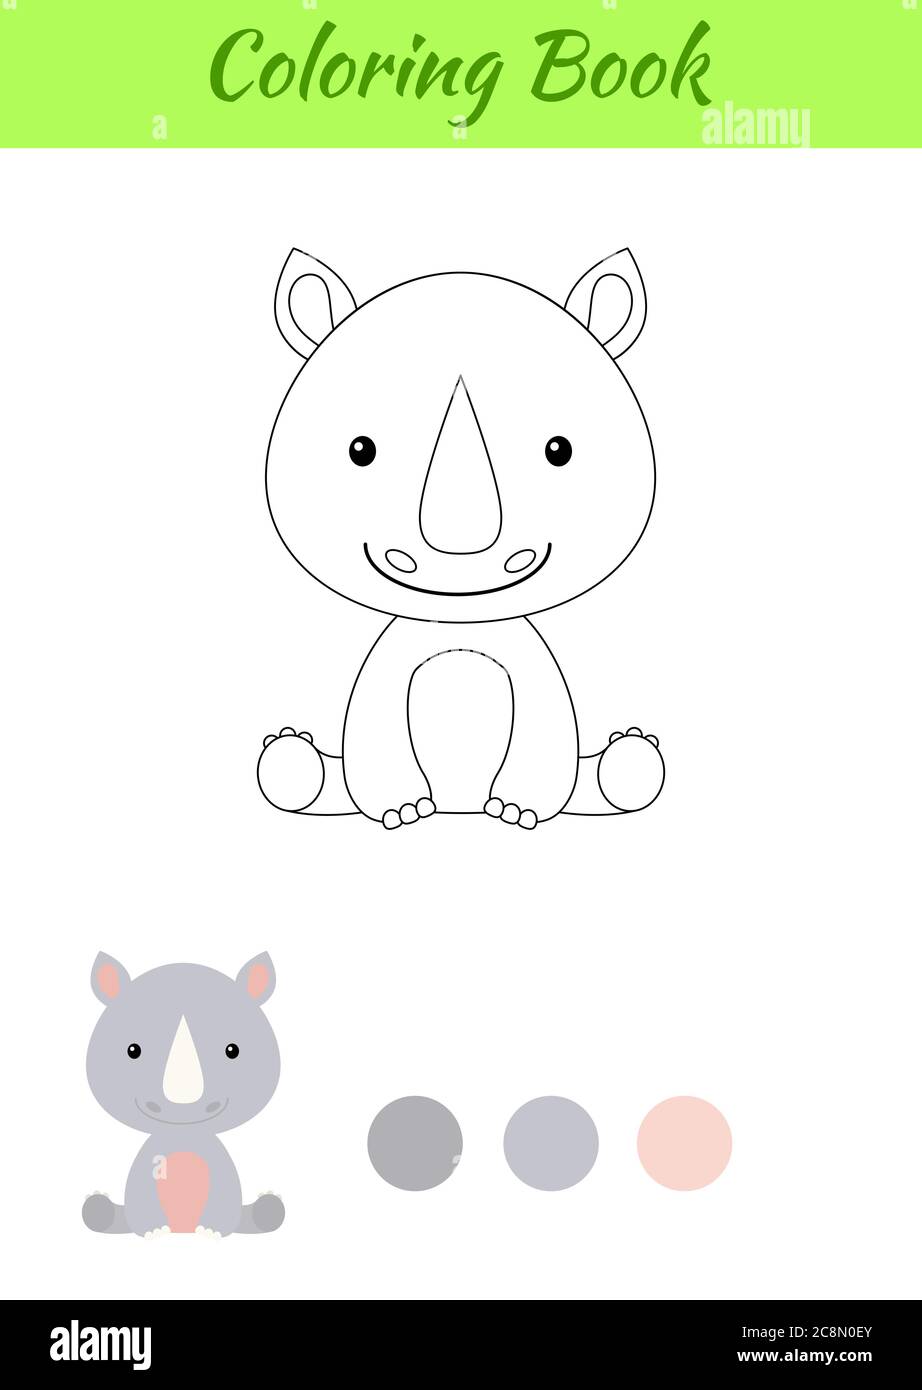 Coloring page little sitting baby rhino. Coloring book for kids. Educational activity for preschool years kids and toddlers with cute animal. Stock Vector